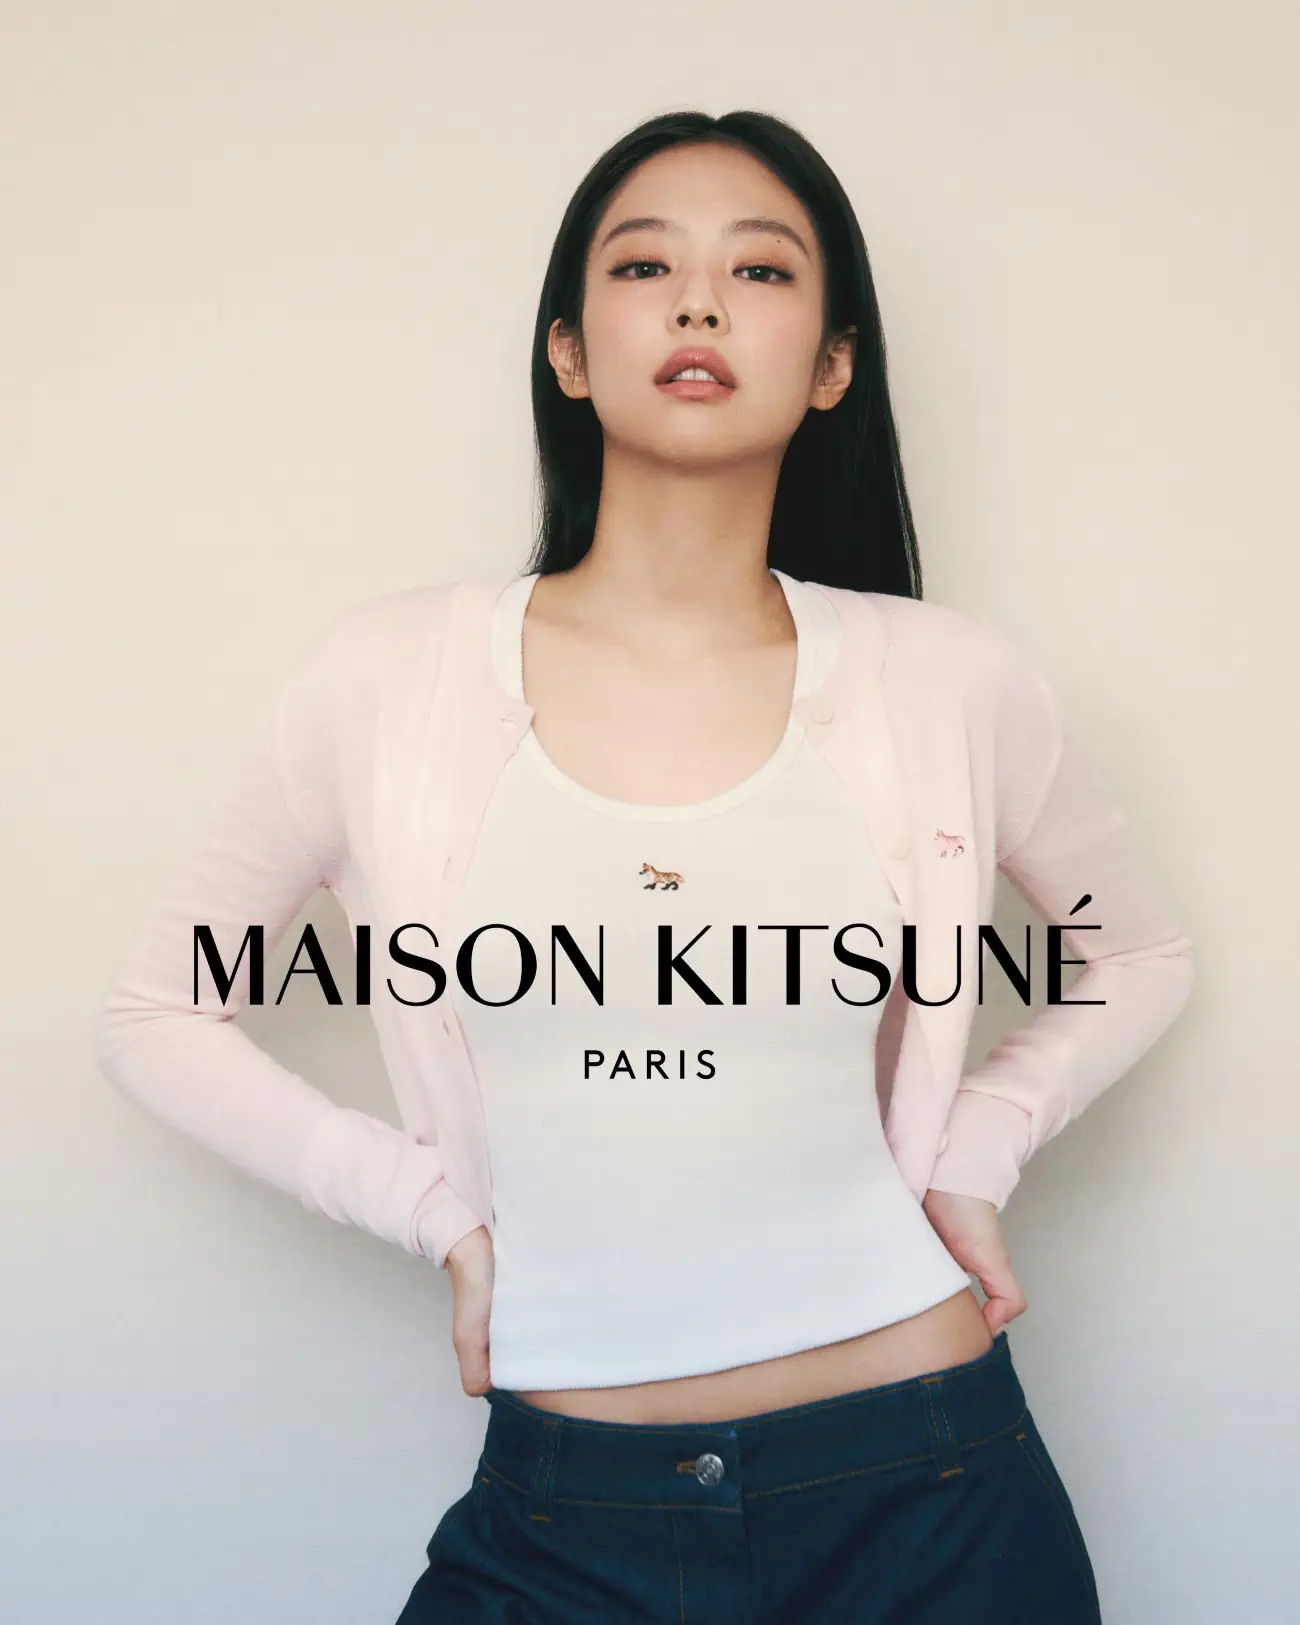 Maison Kitsuné taps Blackpink's Jennie for the campaign of the ''Baby Fox'' collection